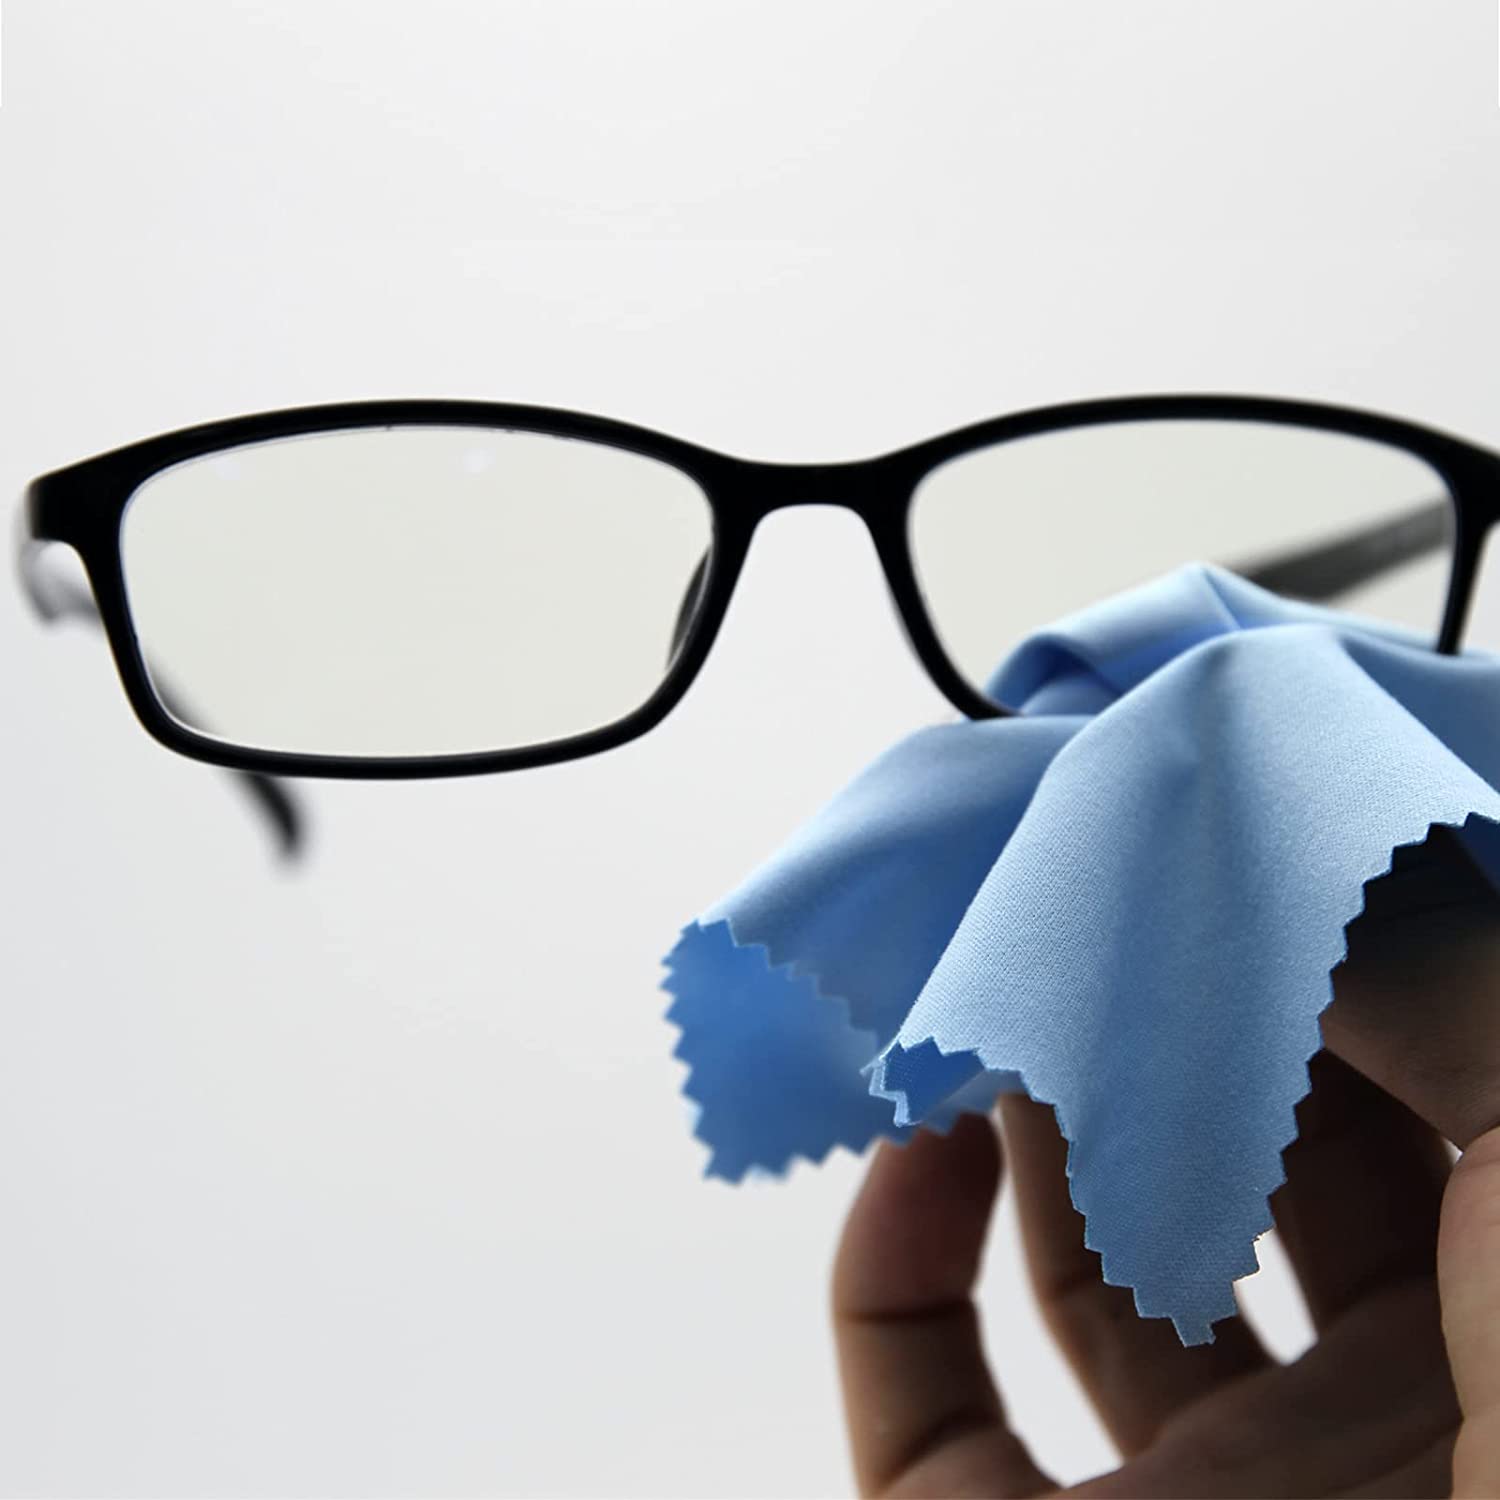 Multi-color Eyeglasses Lens Cloth Neutral and Fully Customizable 10,000pcs/case (5.5"x5.5")